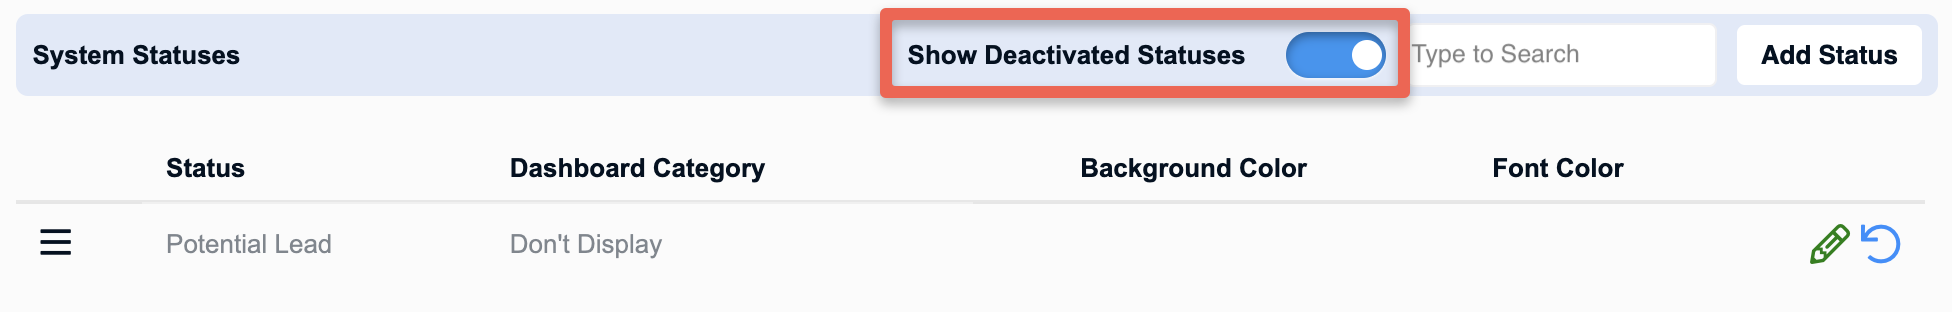 deactivated_status.png